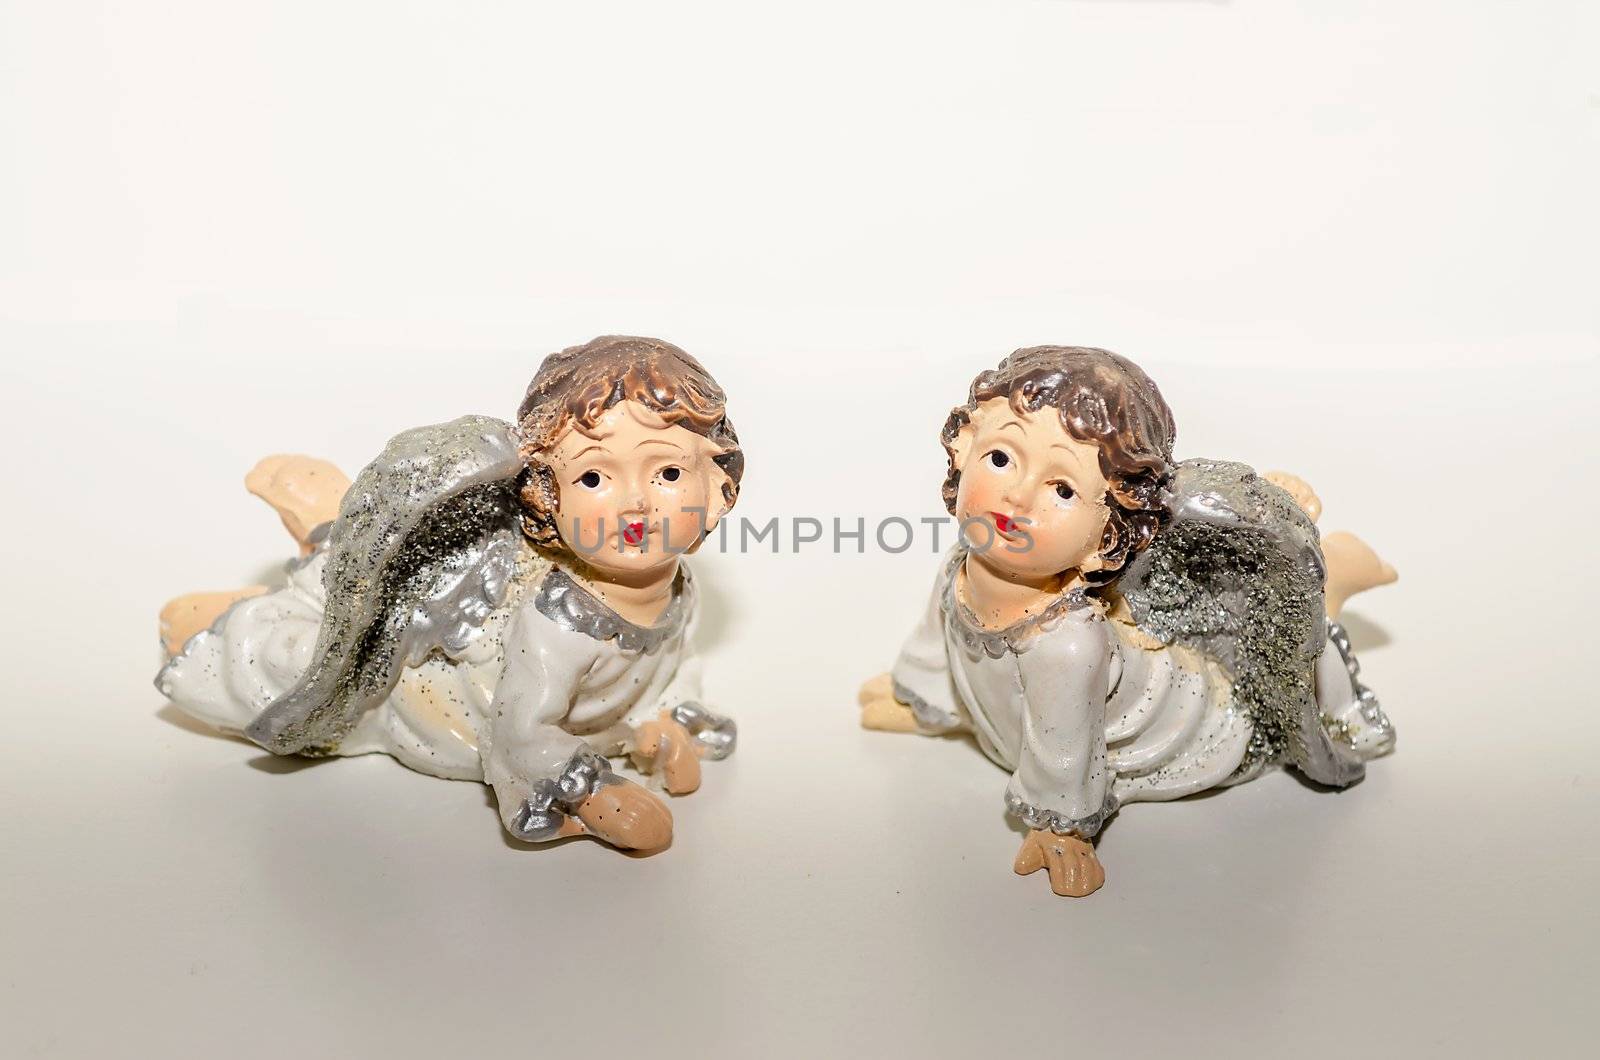 Ceramic Statuette of Two Cute Angels Close To Each Other by marcorubino